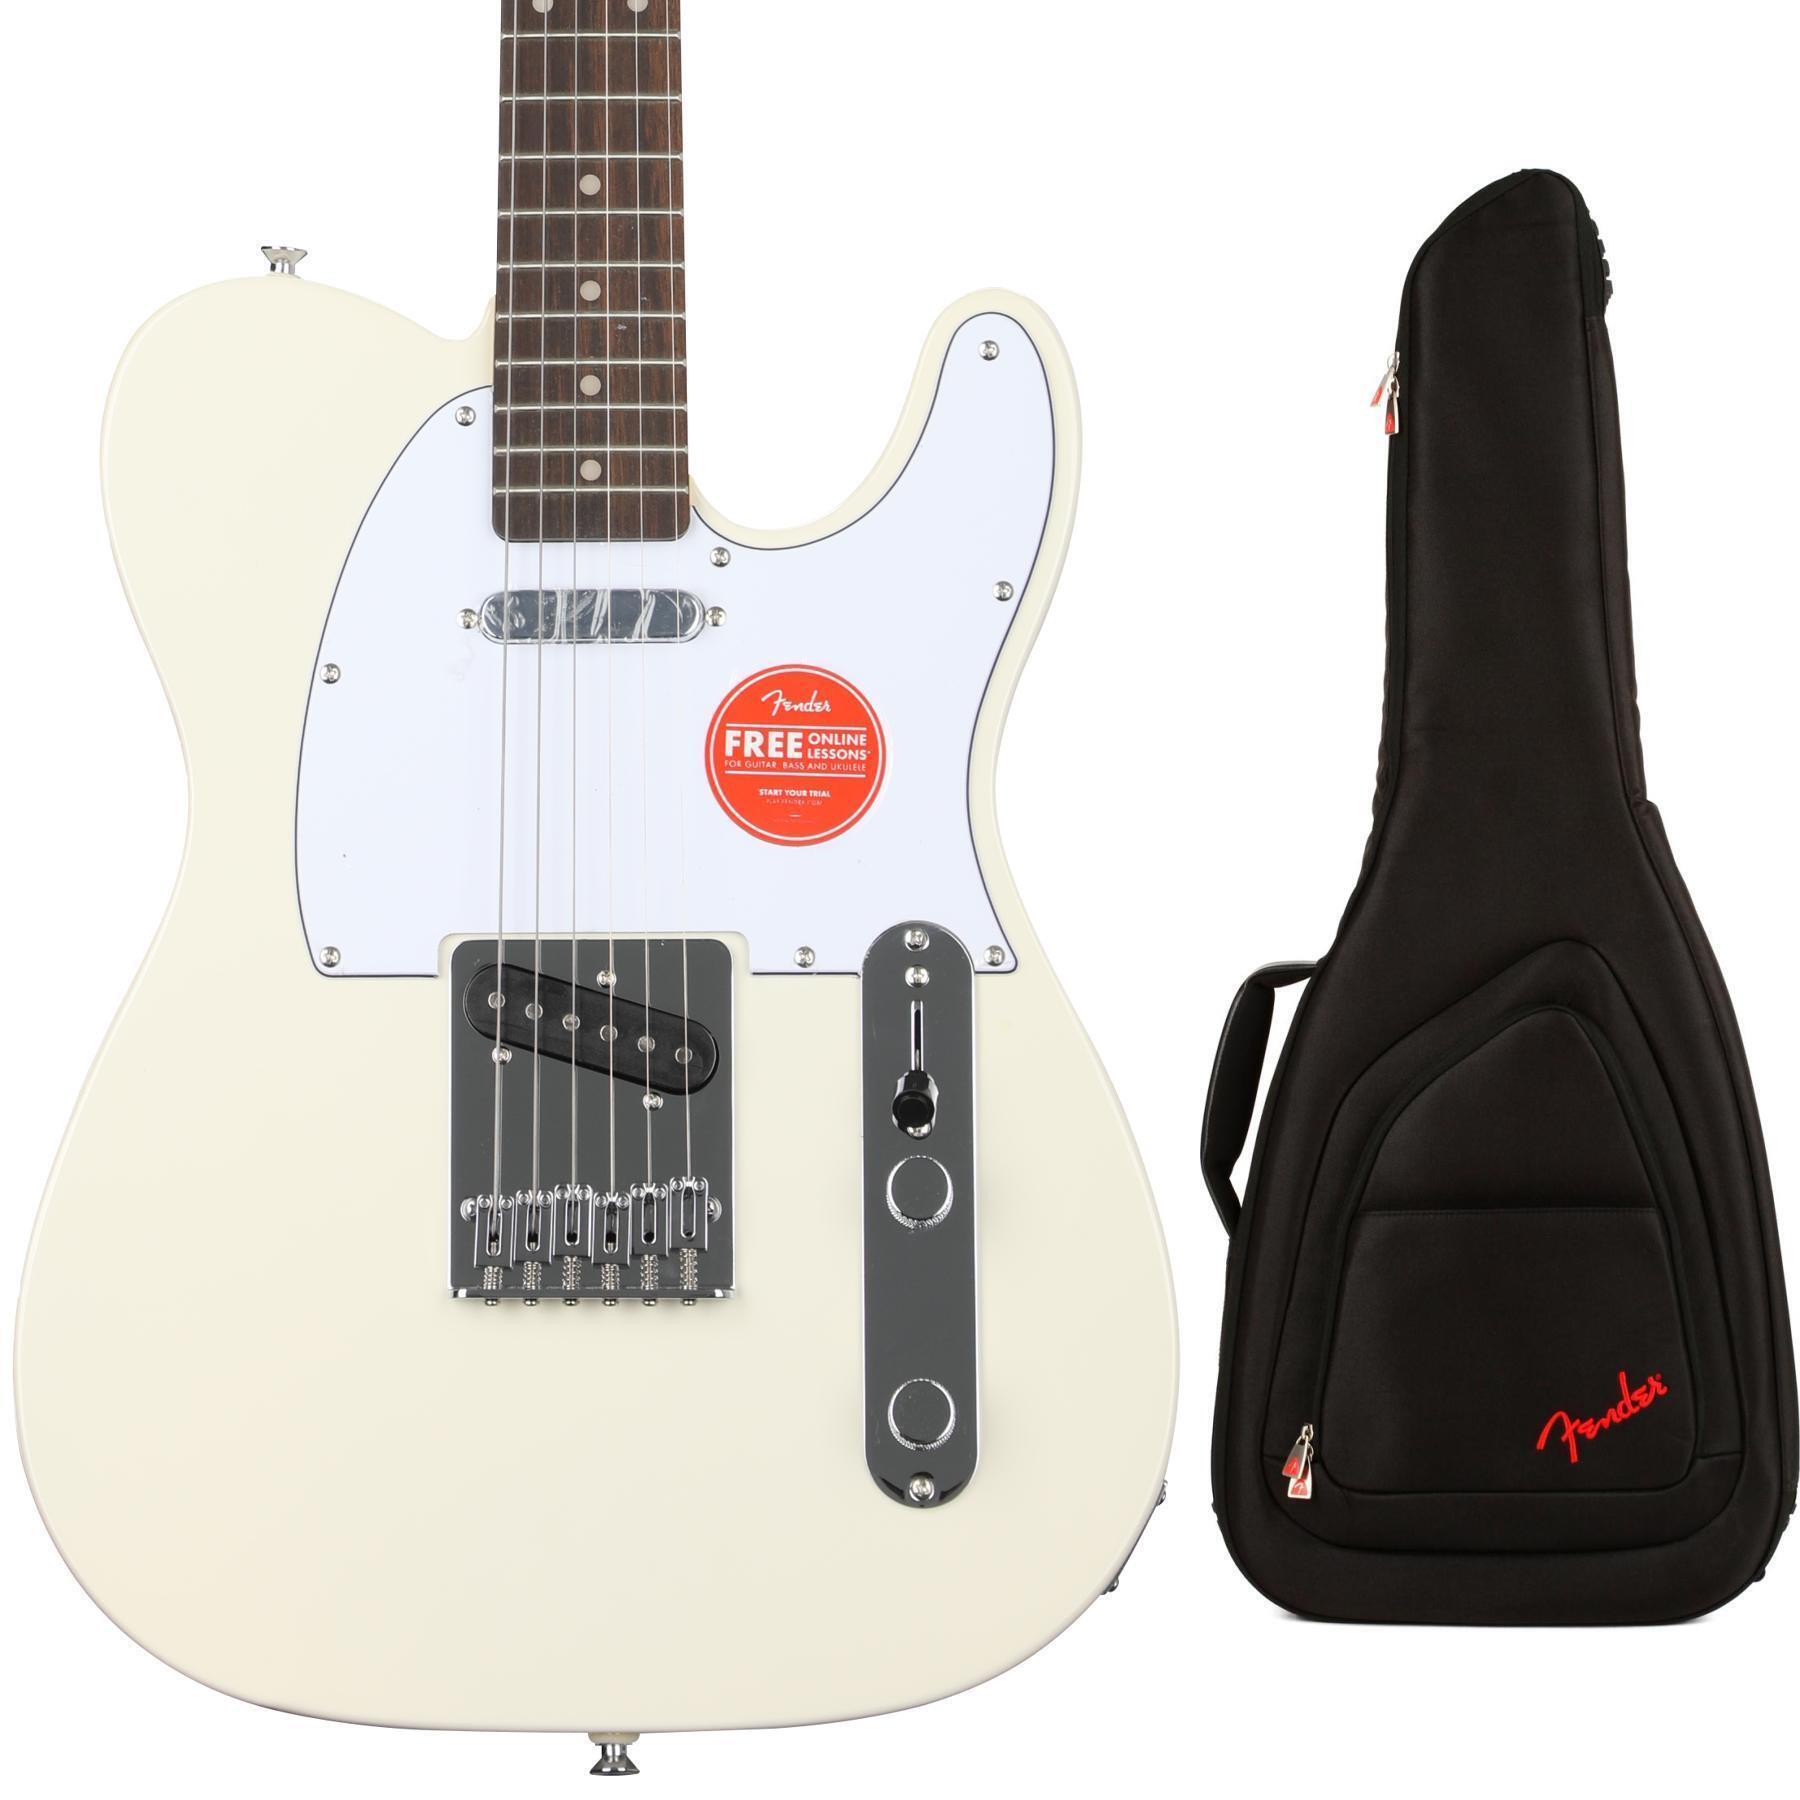 Squier Affinity Series Telecaster Electric Guitar with Gig Bag 